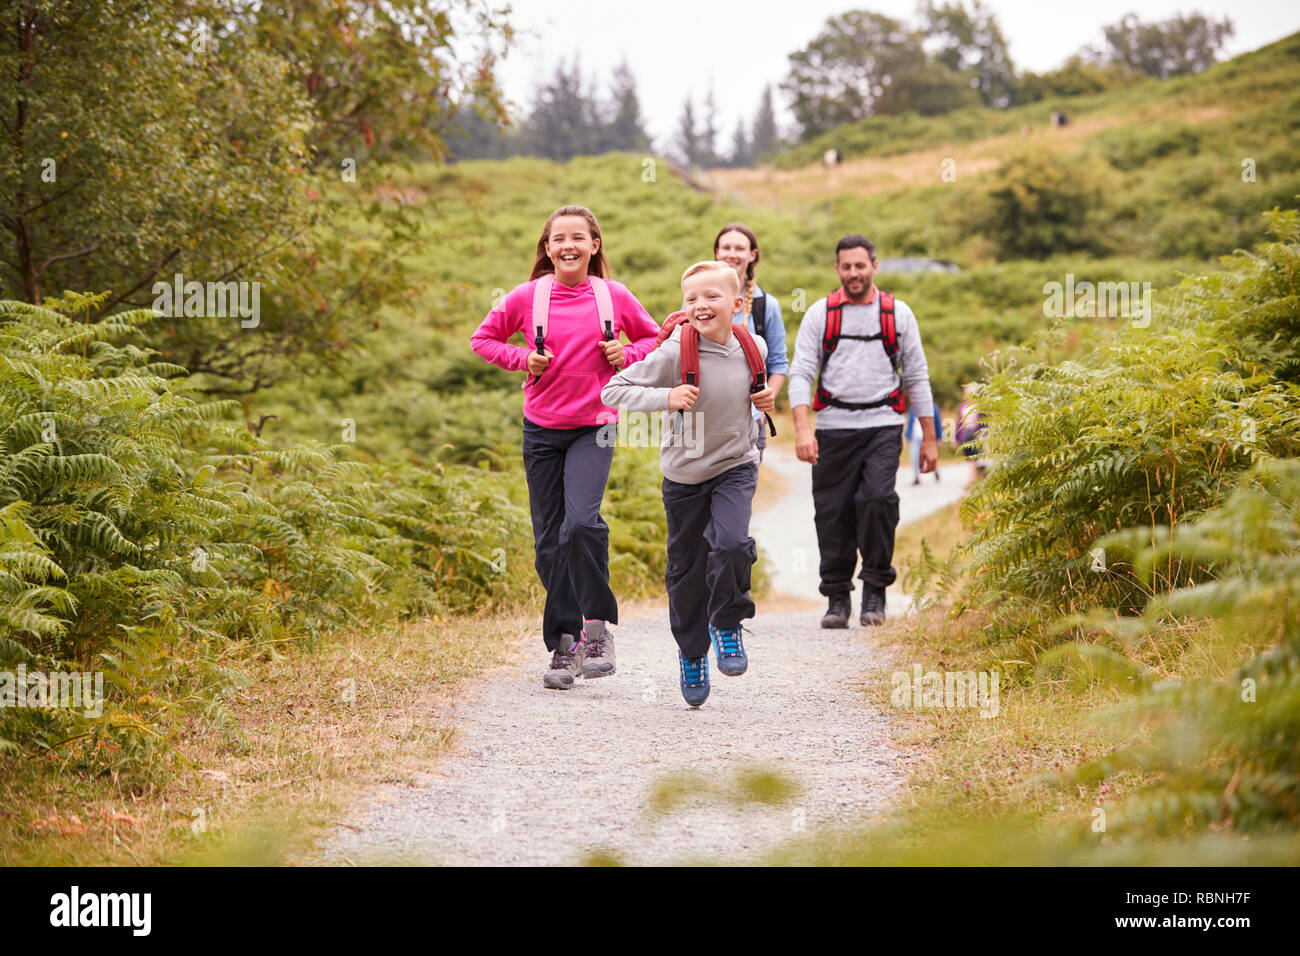 Children running ahead of parents walking on a country path during a family camping trip, selective focus Stock Photo